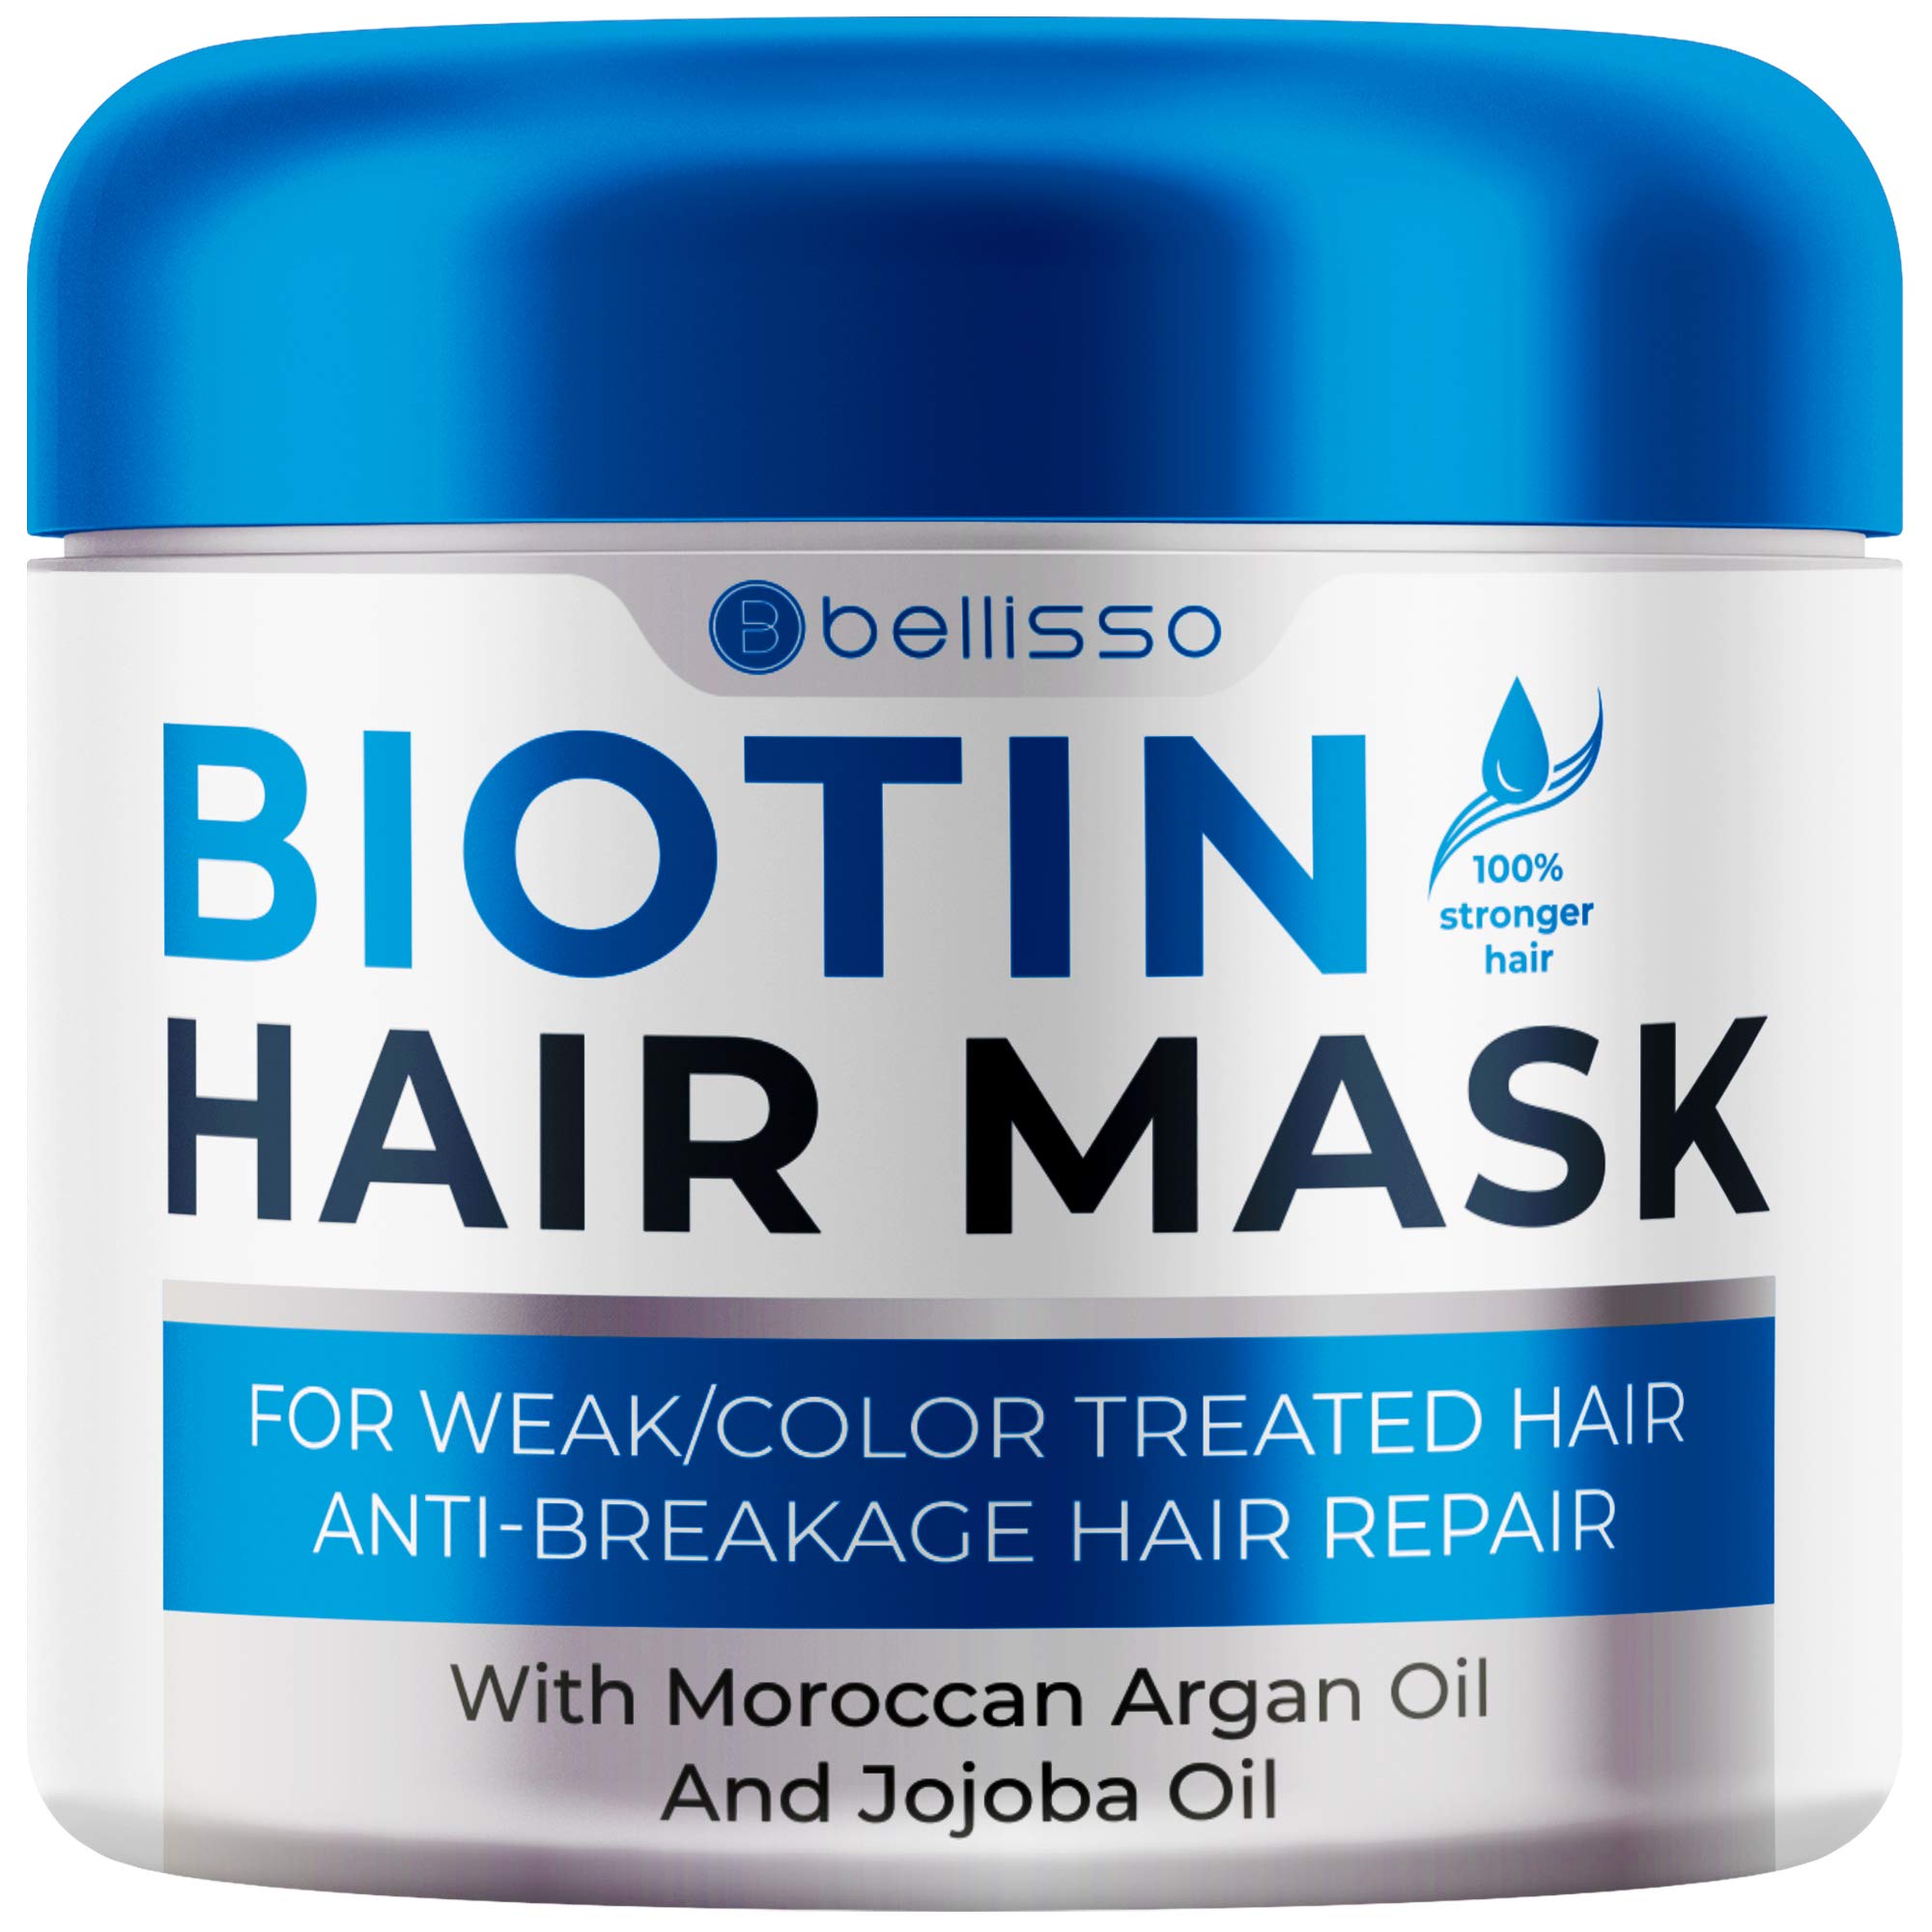 Bellisso Biotin Hair Mask - Volume Boost and Deep Conditioner for Dry Damaged Hair